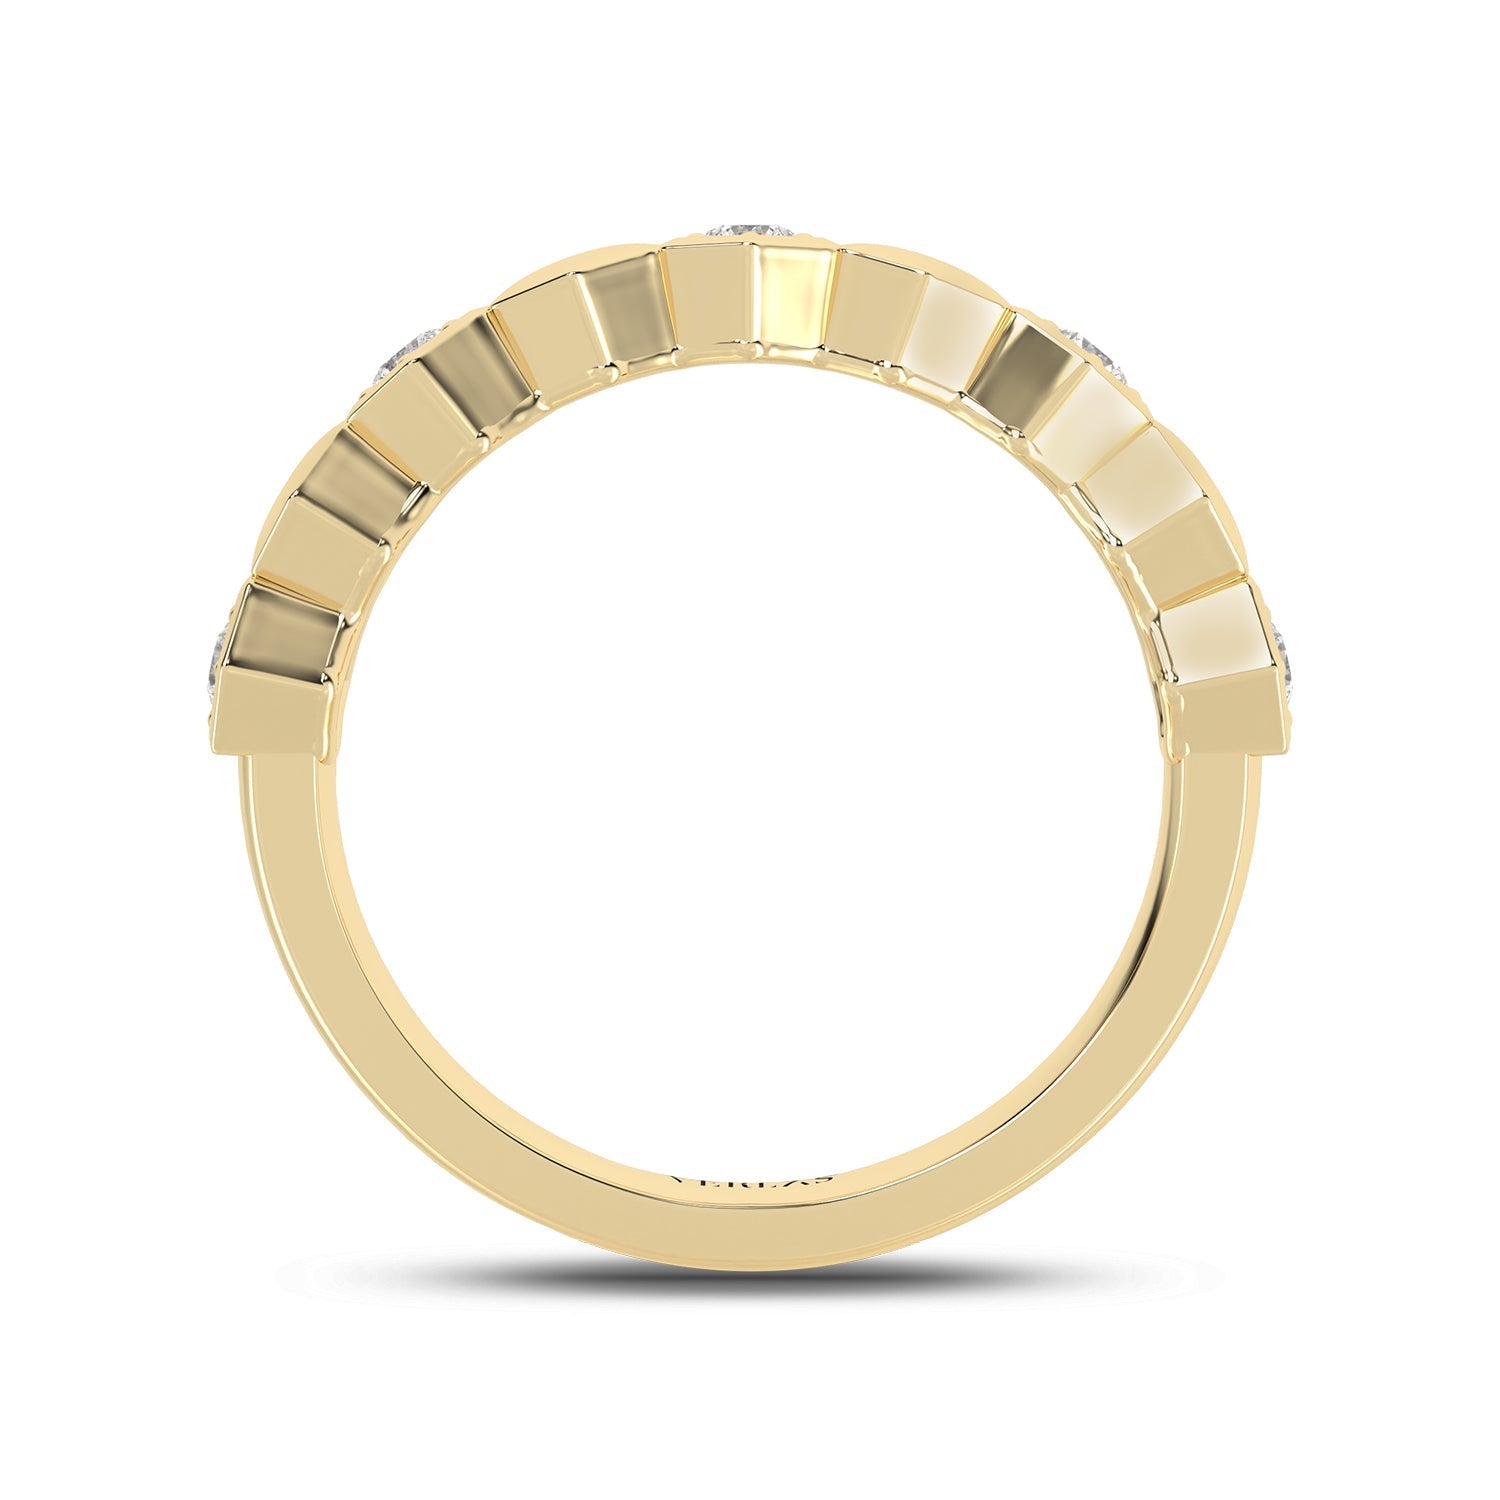 Essential 4-Pronged Round Ring_Product Angle_1/6 Ct. - 3